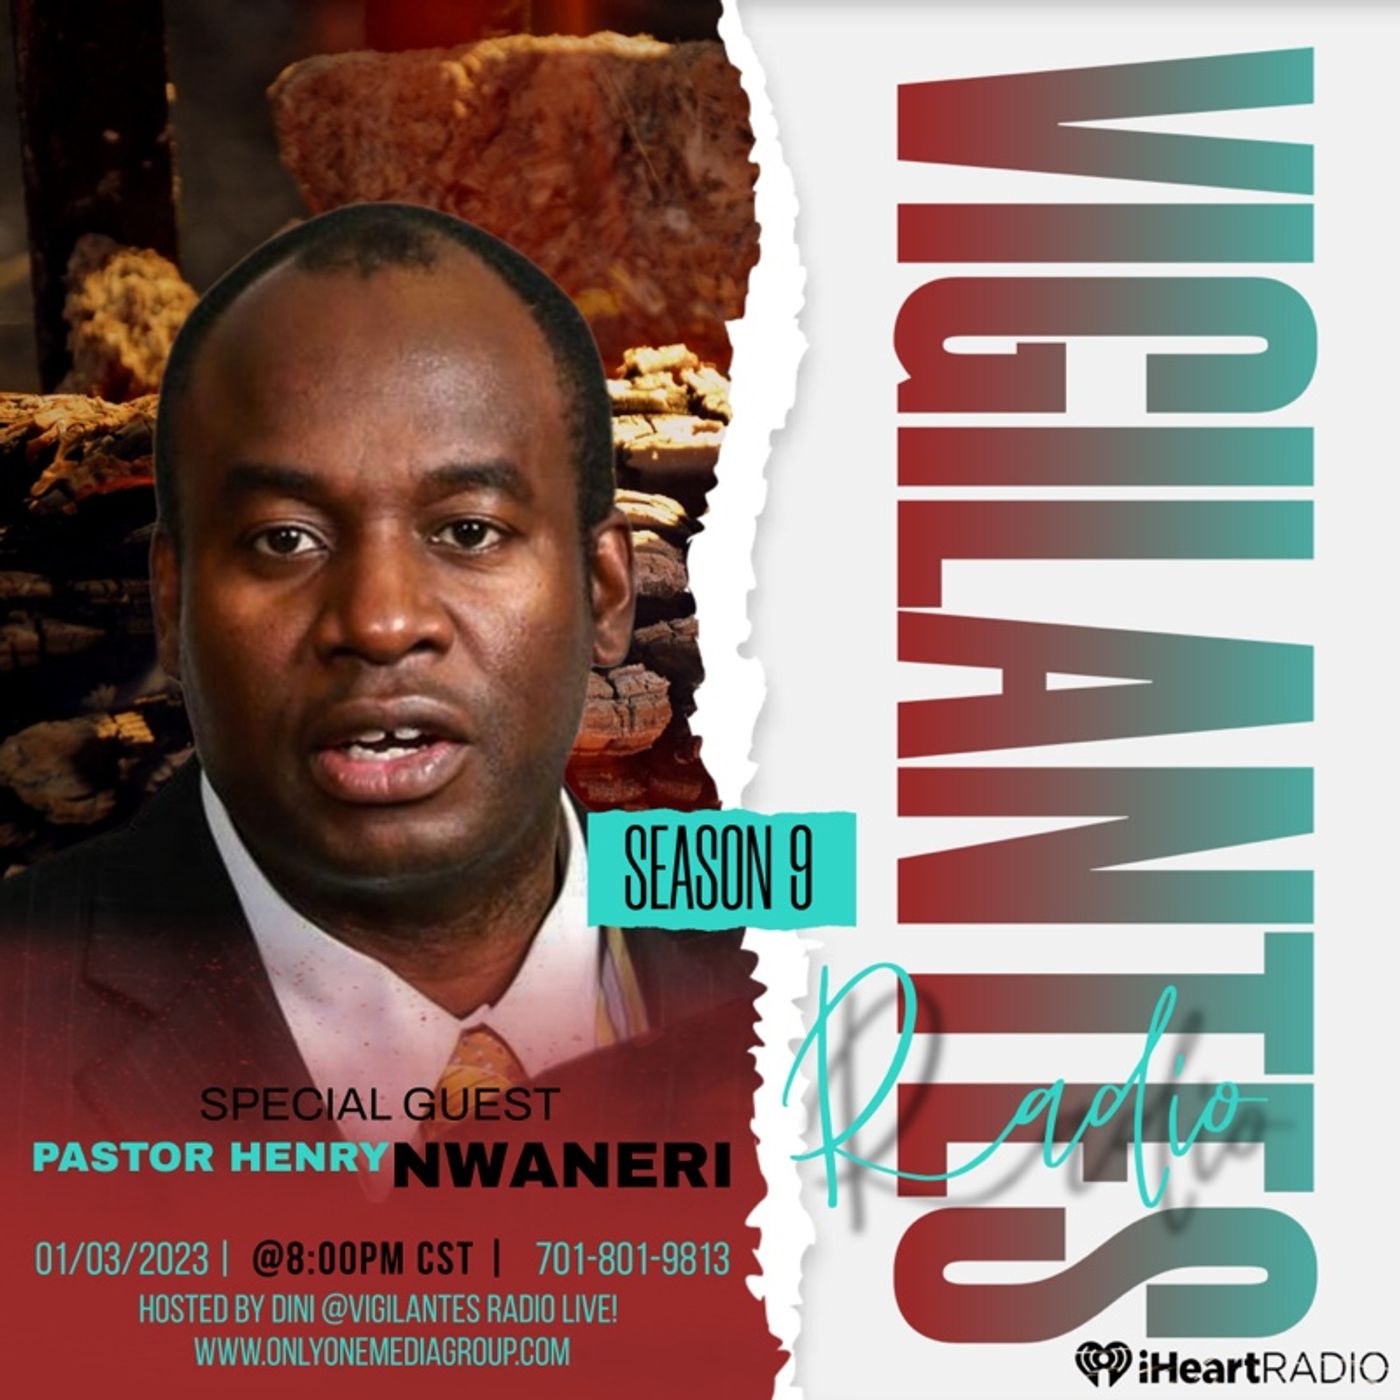 The Pastor Henry Nwaneri Interview. Image